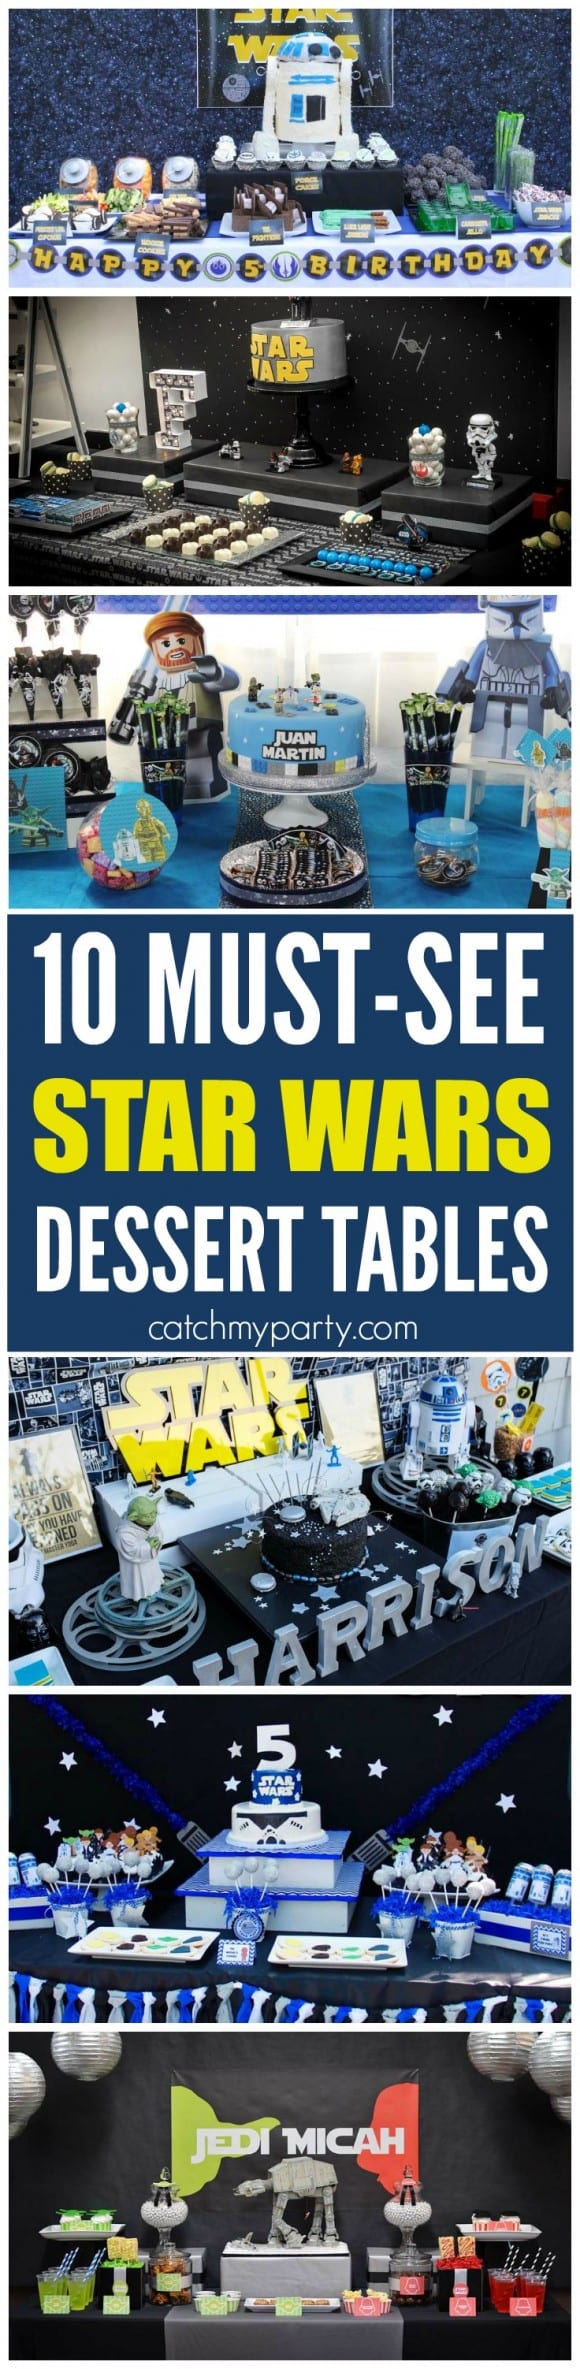 10 Must-See Star Wars Dessert Tables | CatchMyParty.com